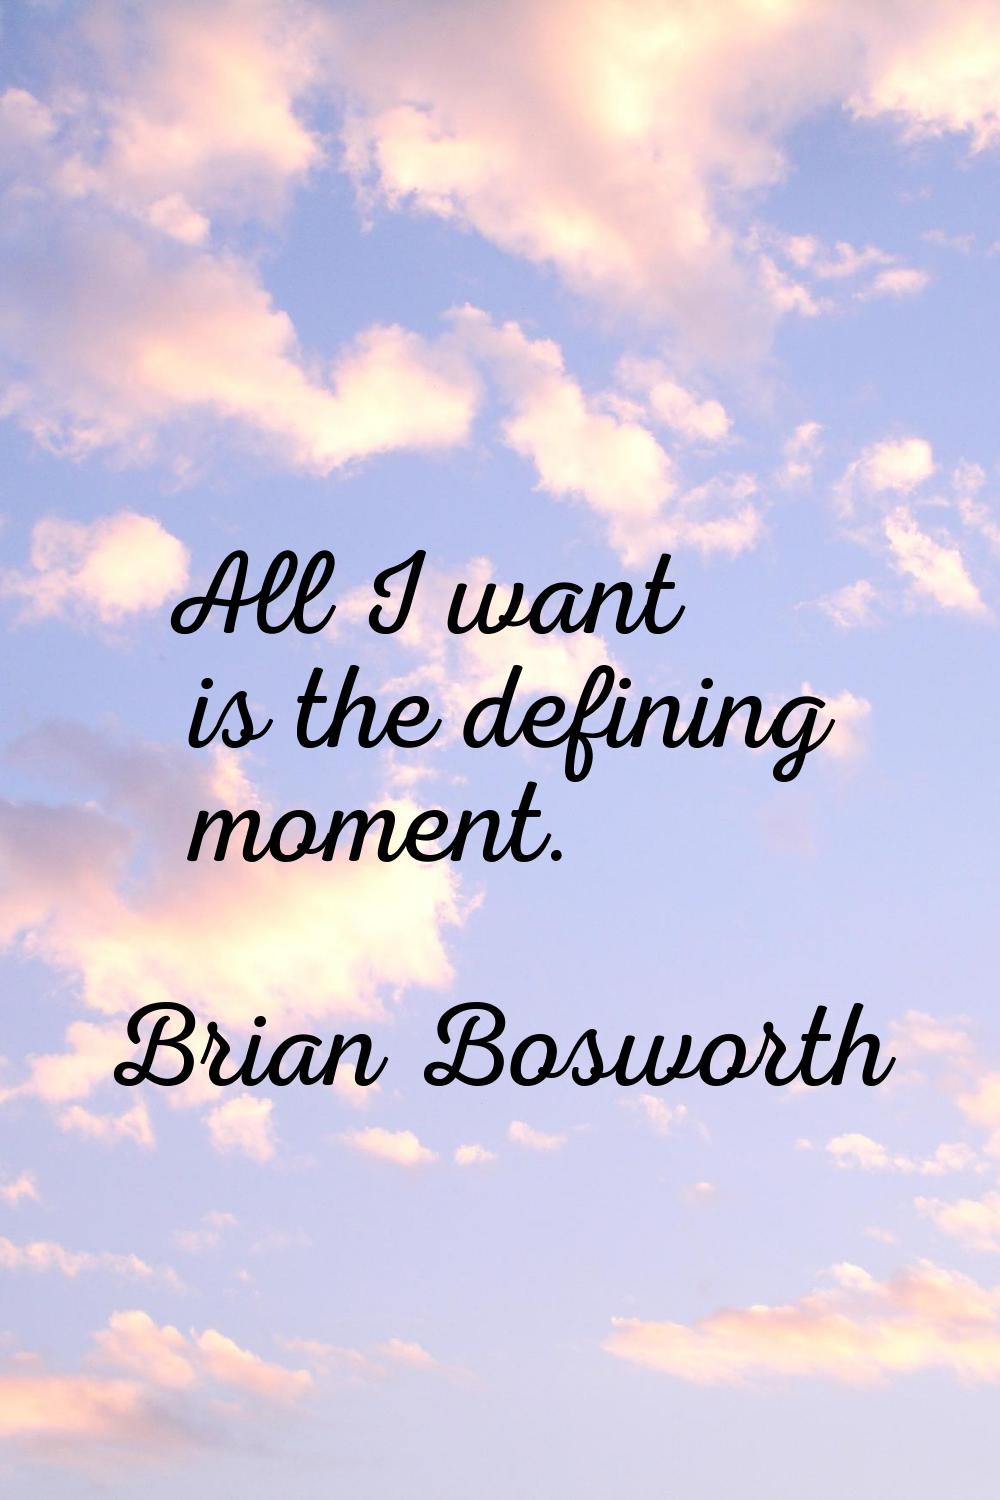 All I want is the defining moment.